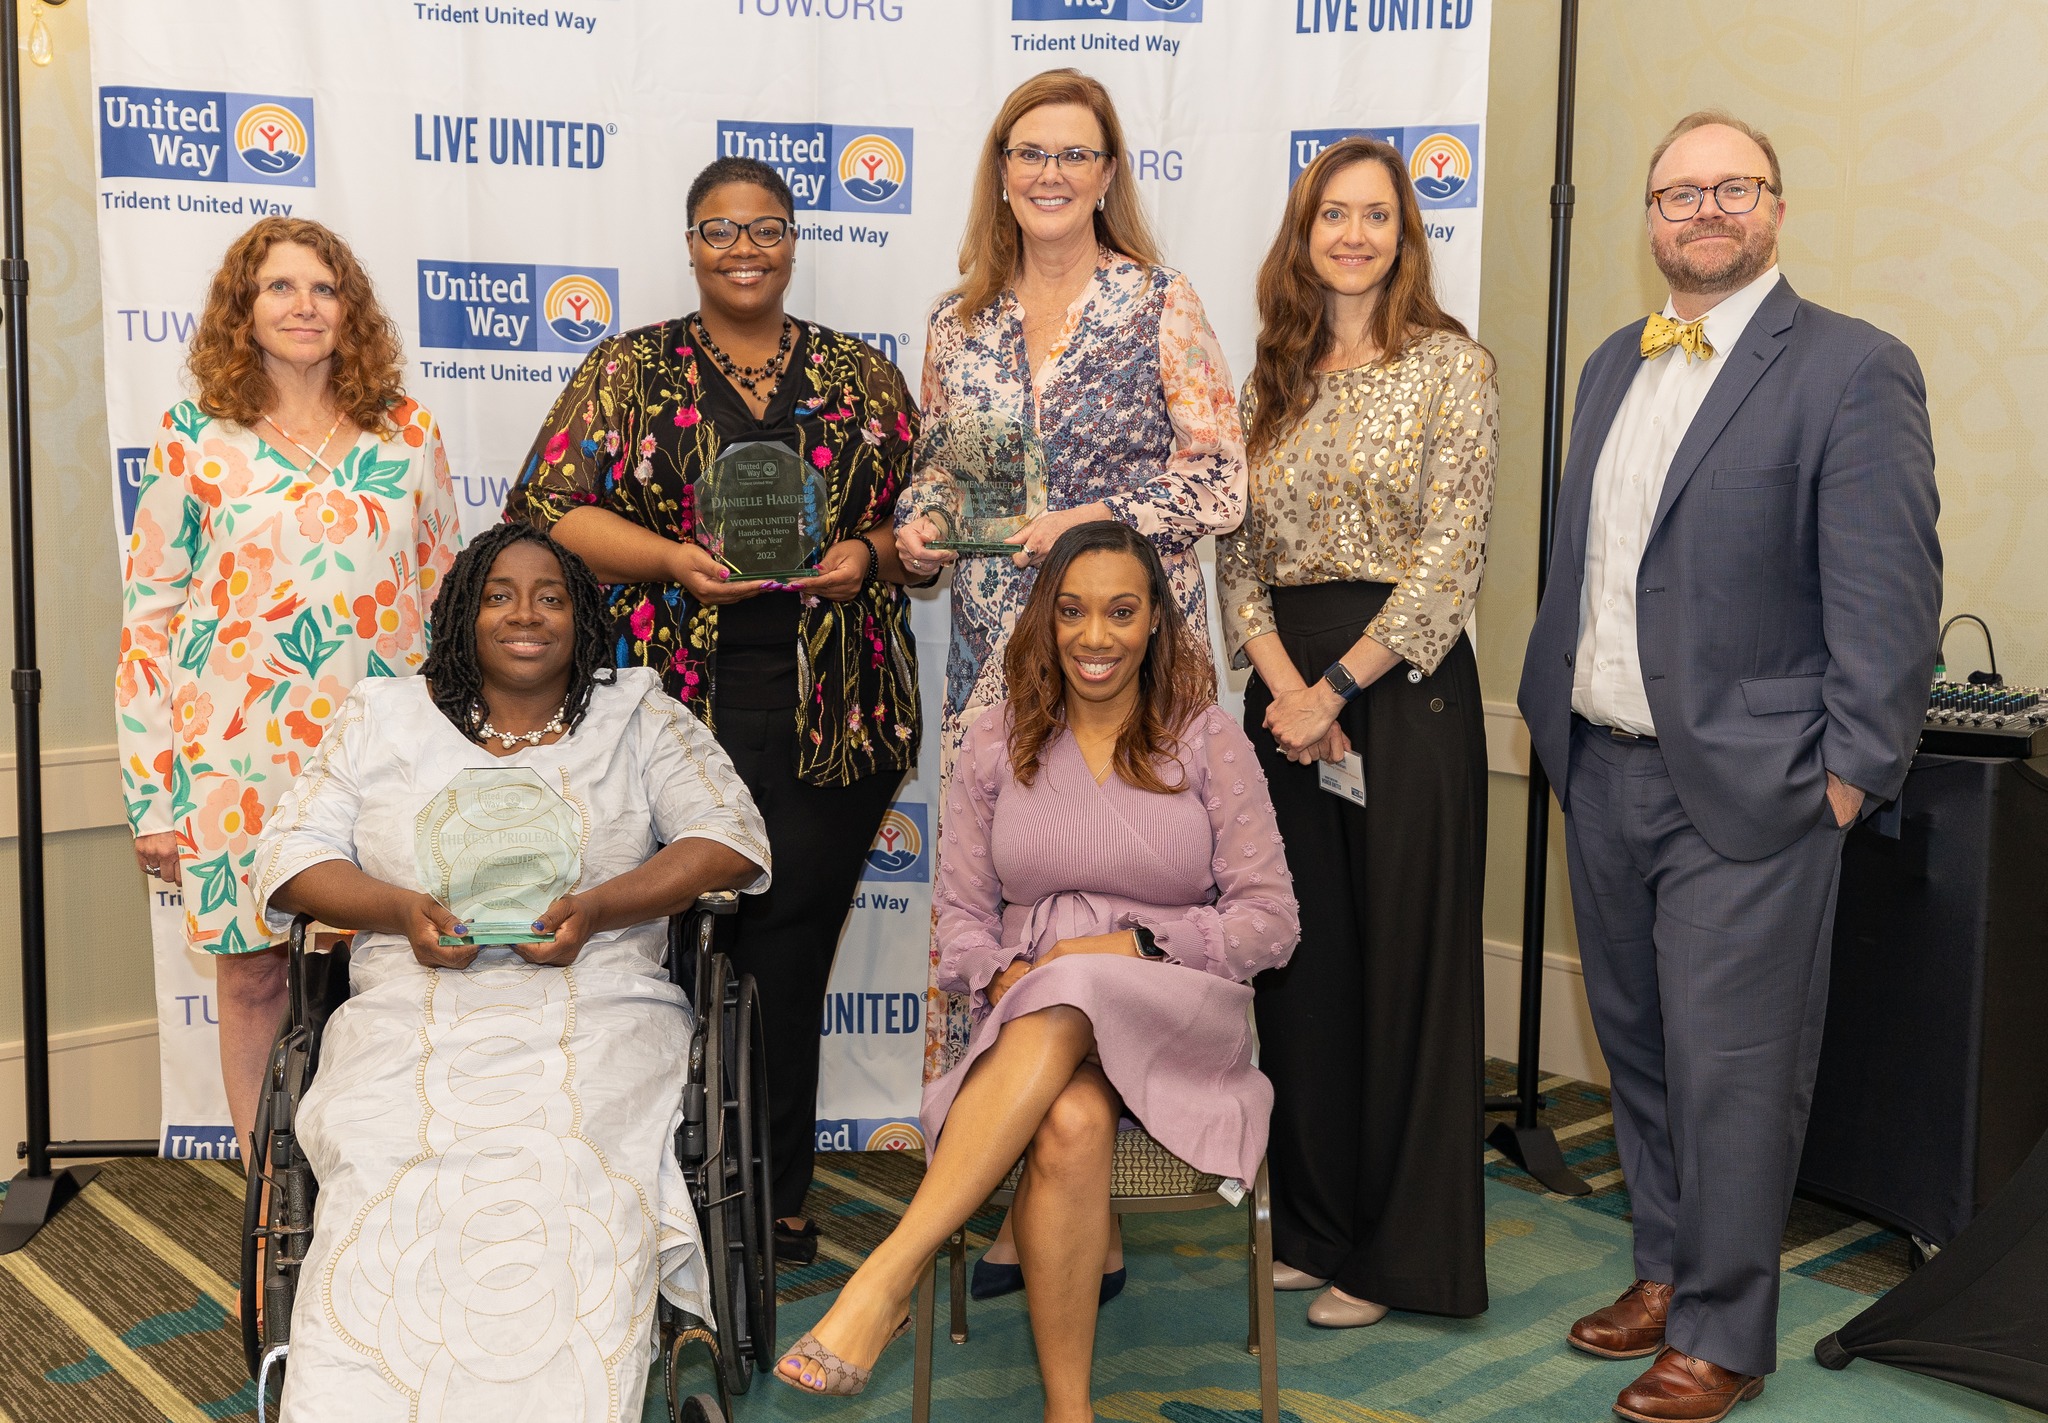 "A group of people including three award nominees smile in front of a Trident United Way background."